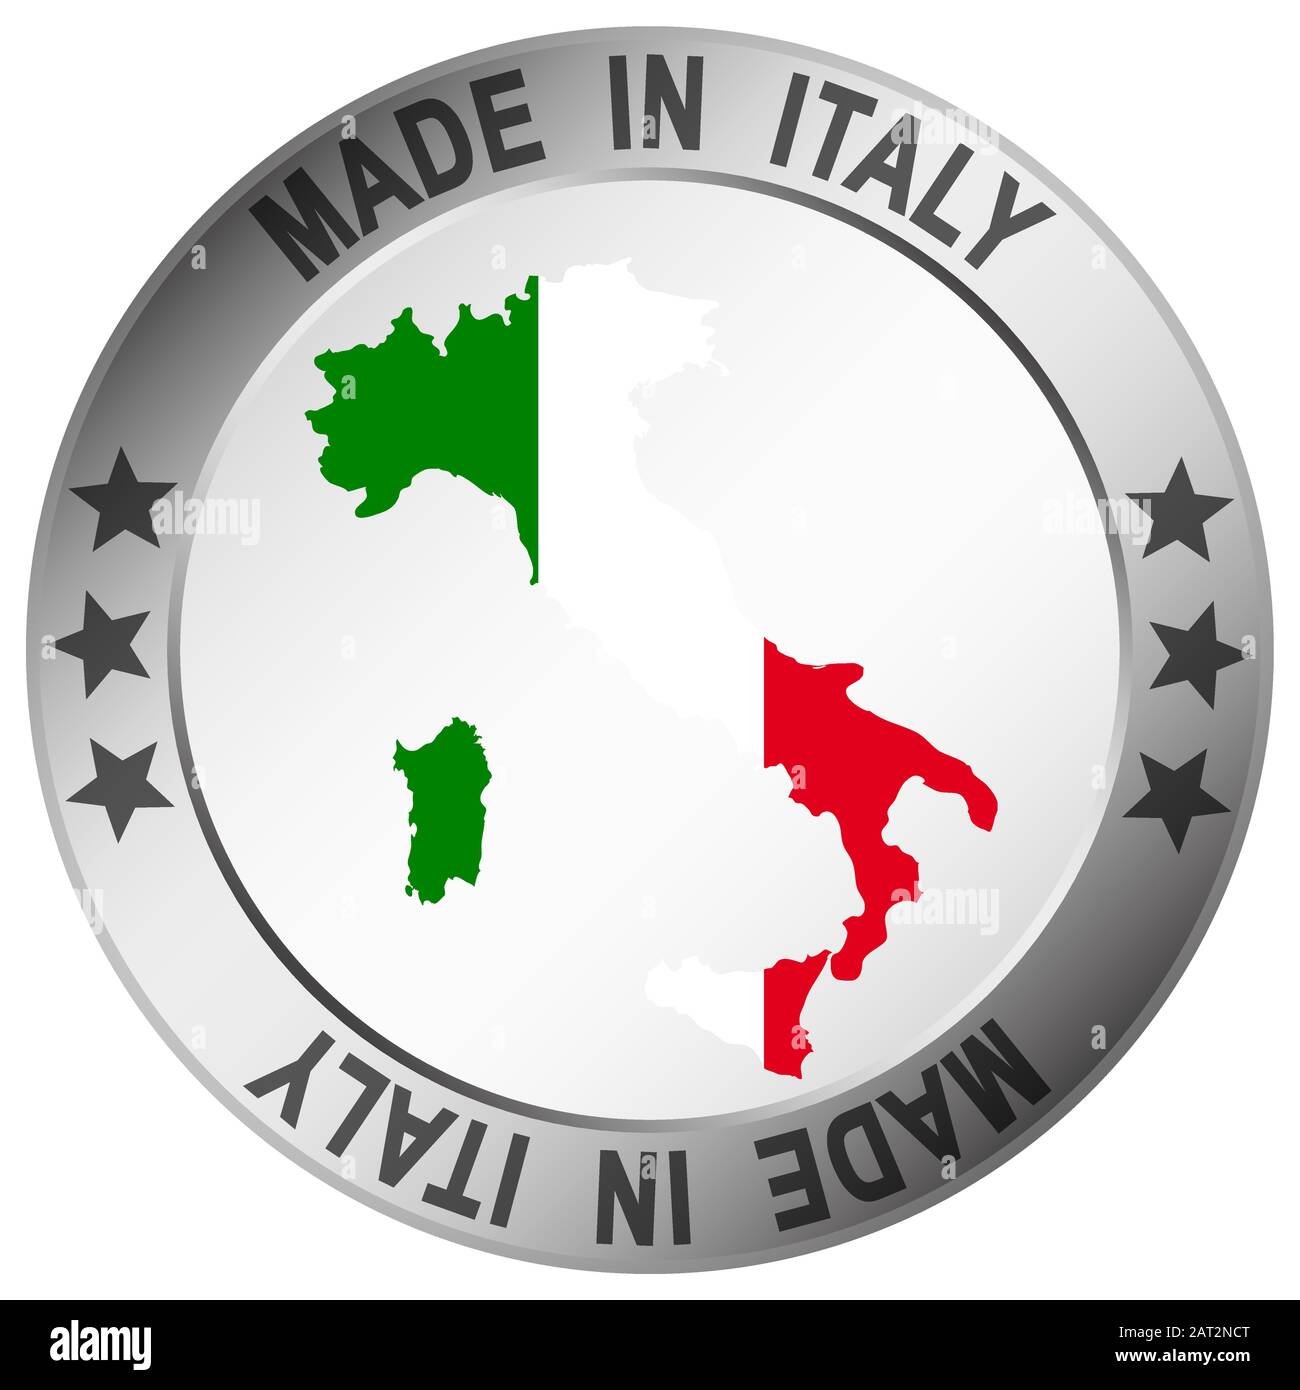 round button with silver frame and text Made in Italy Stock Vector